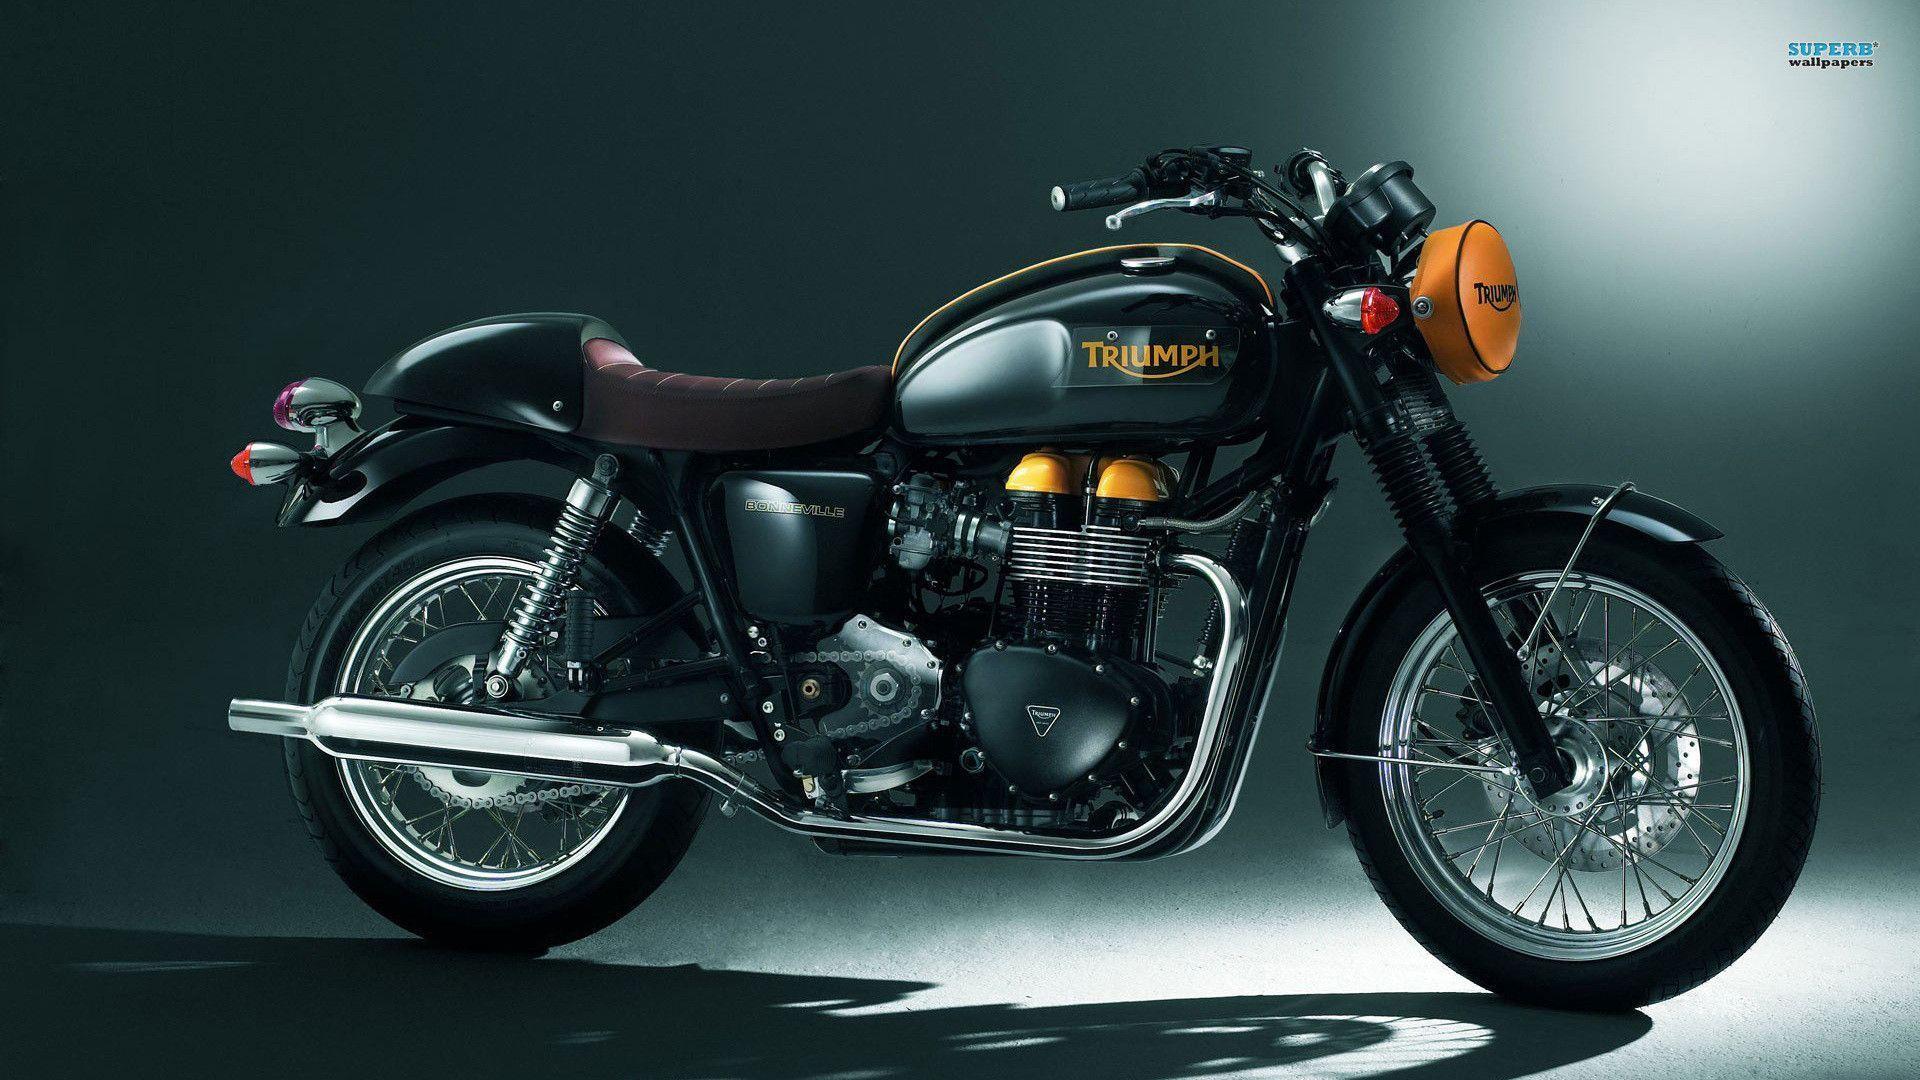 Triumph motorcycle s on